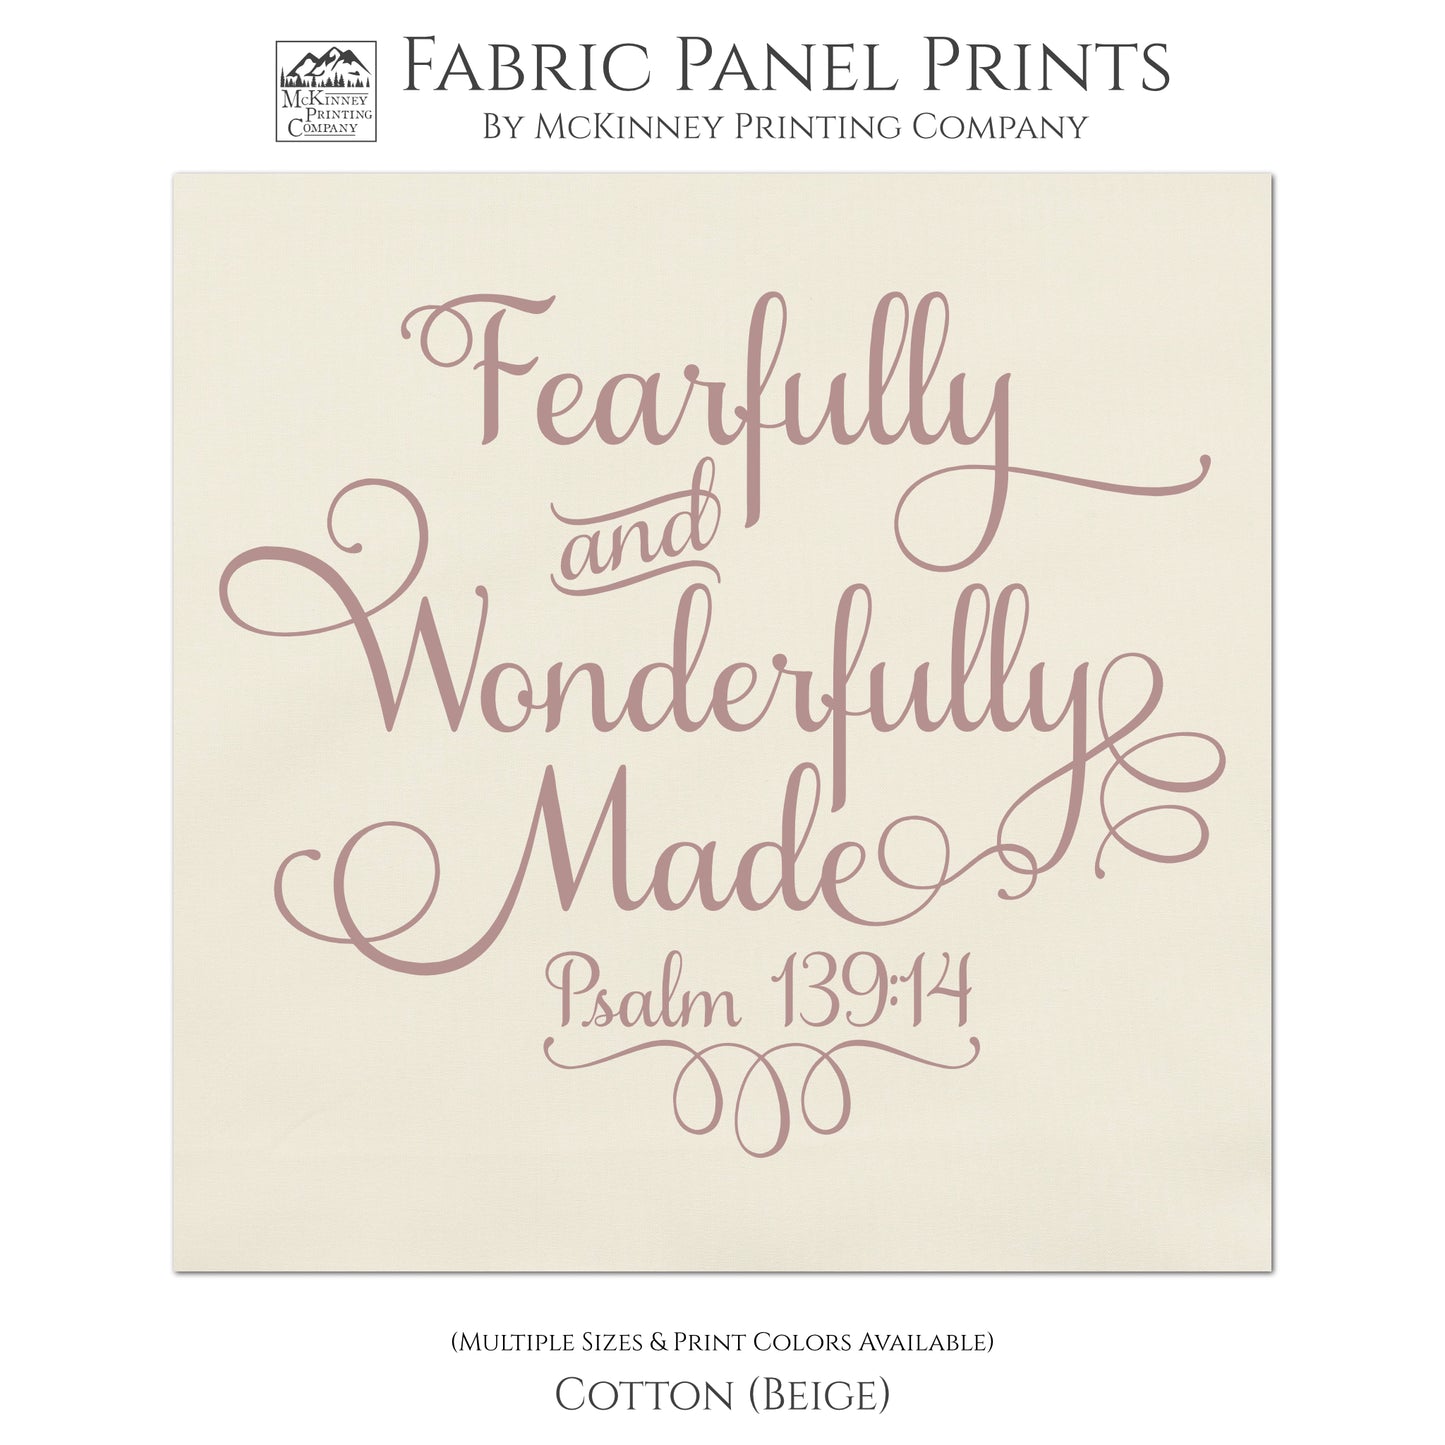 I am fearfully and wonderfully made - Psalm 139:14, Fabric Panel Print, Quilt Block, Scripture Fabric, Girl Gift - Cotton